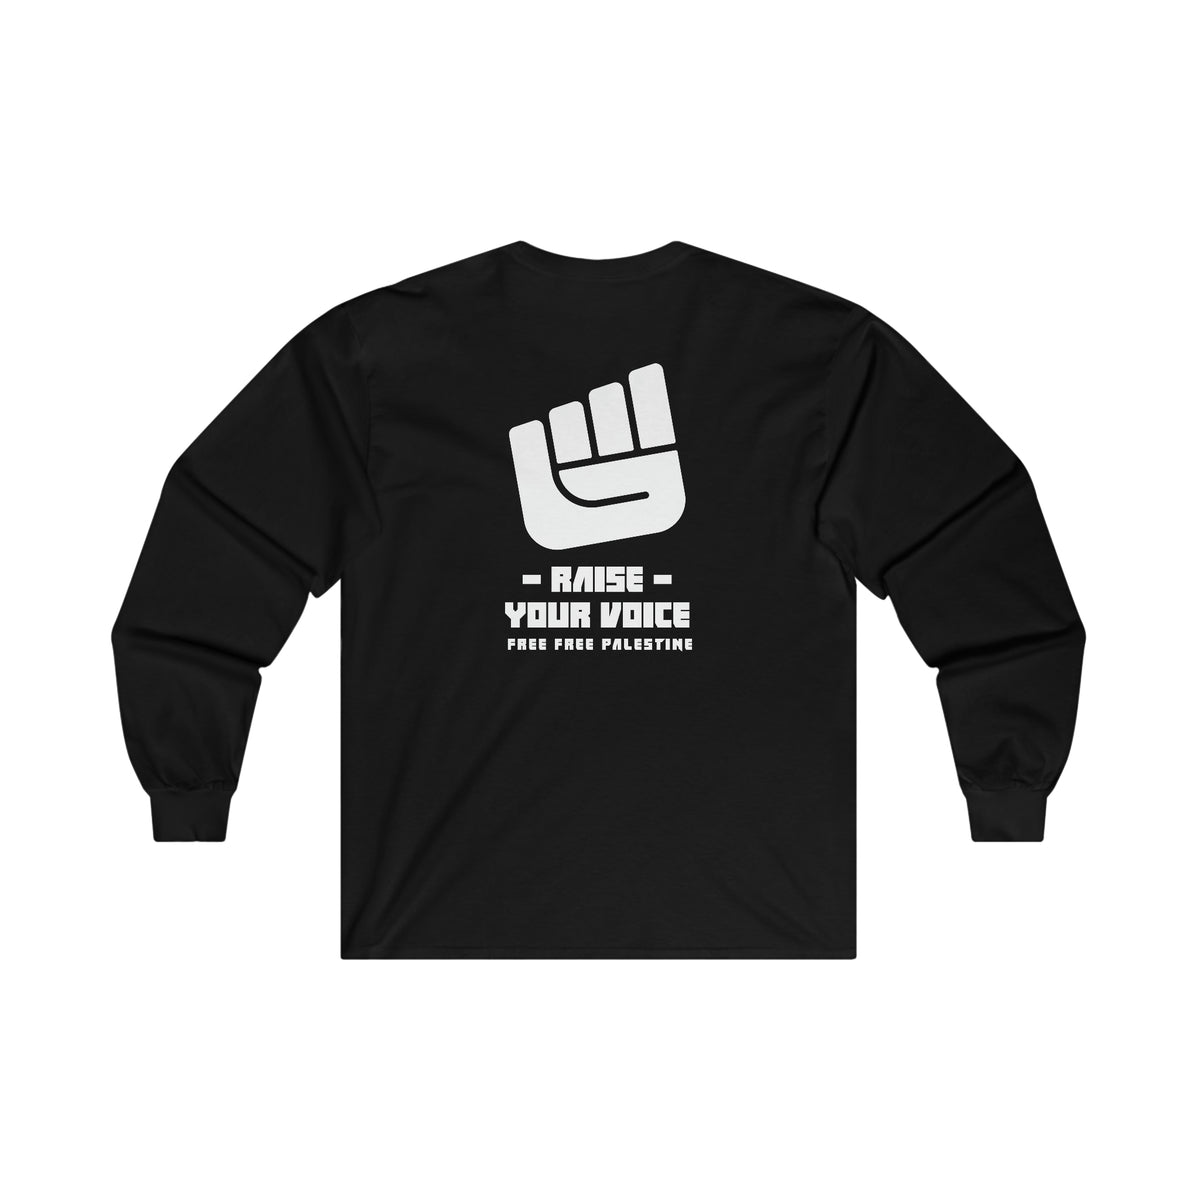 Free Free Palestine DGN WH Long Sleeve Tee